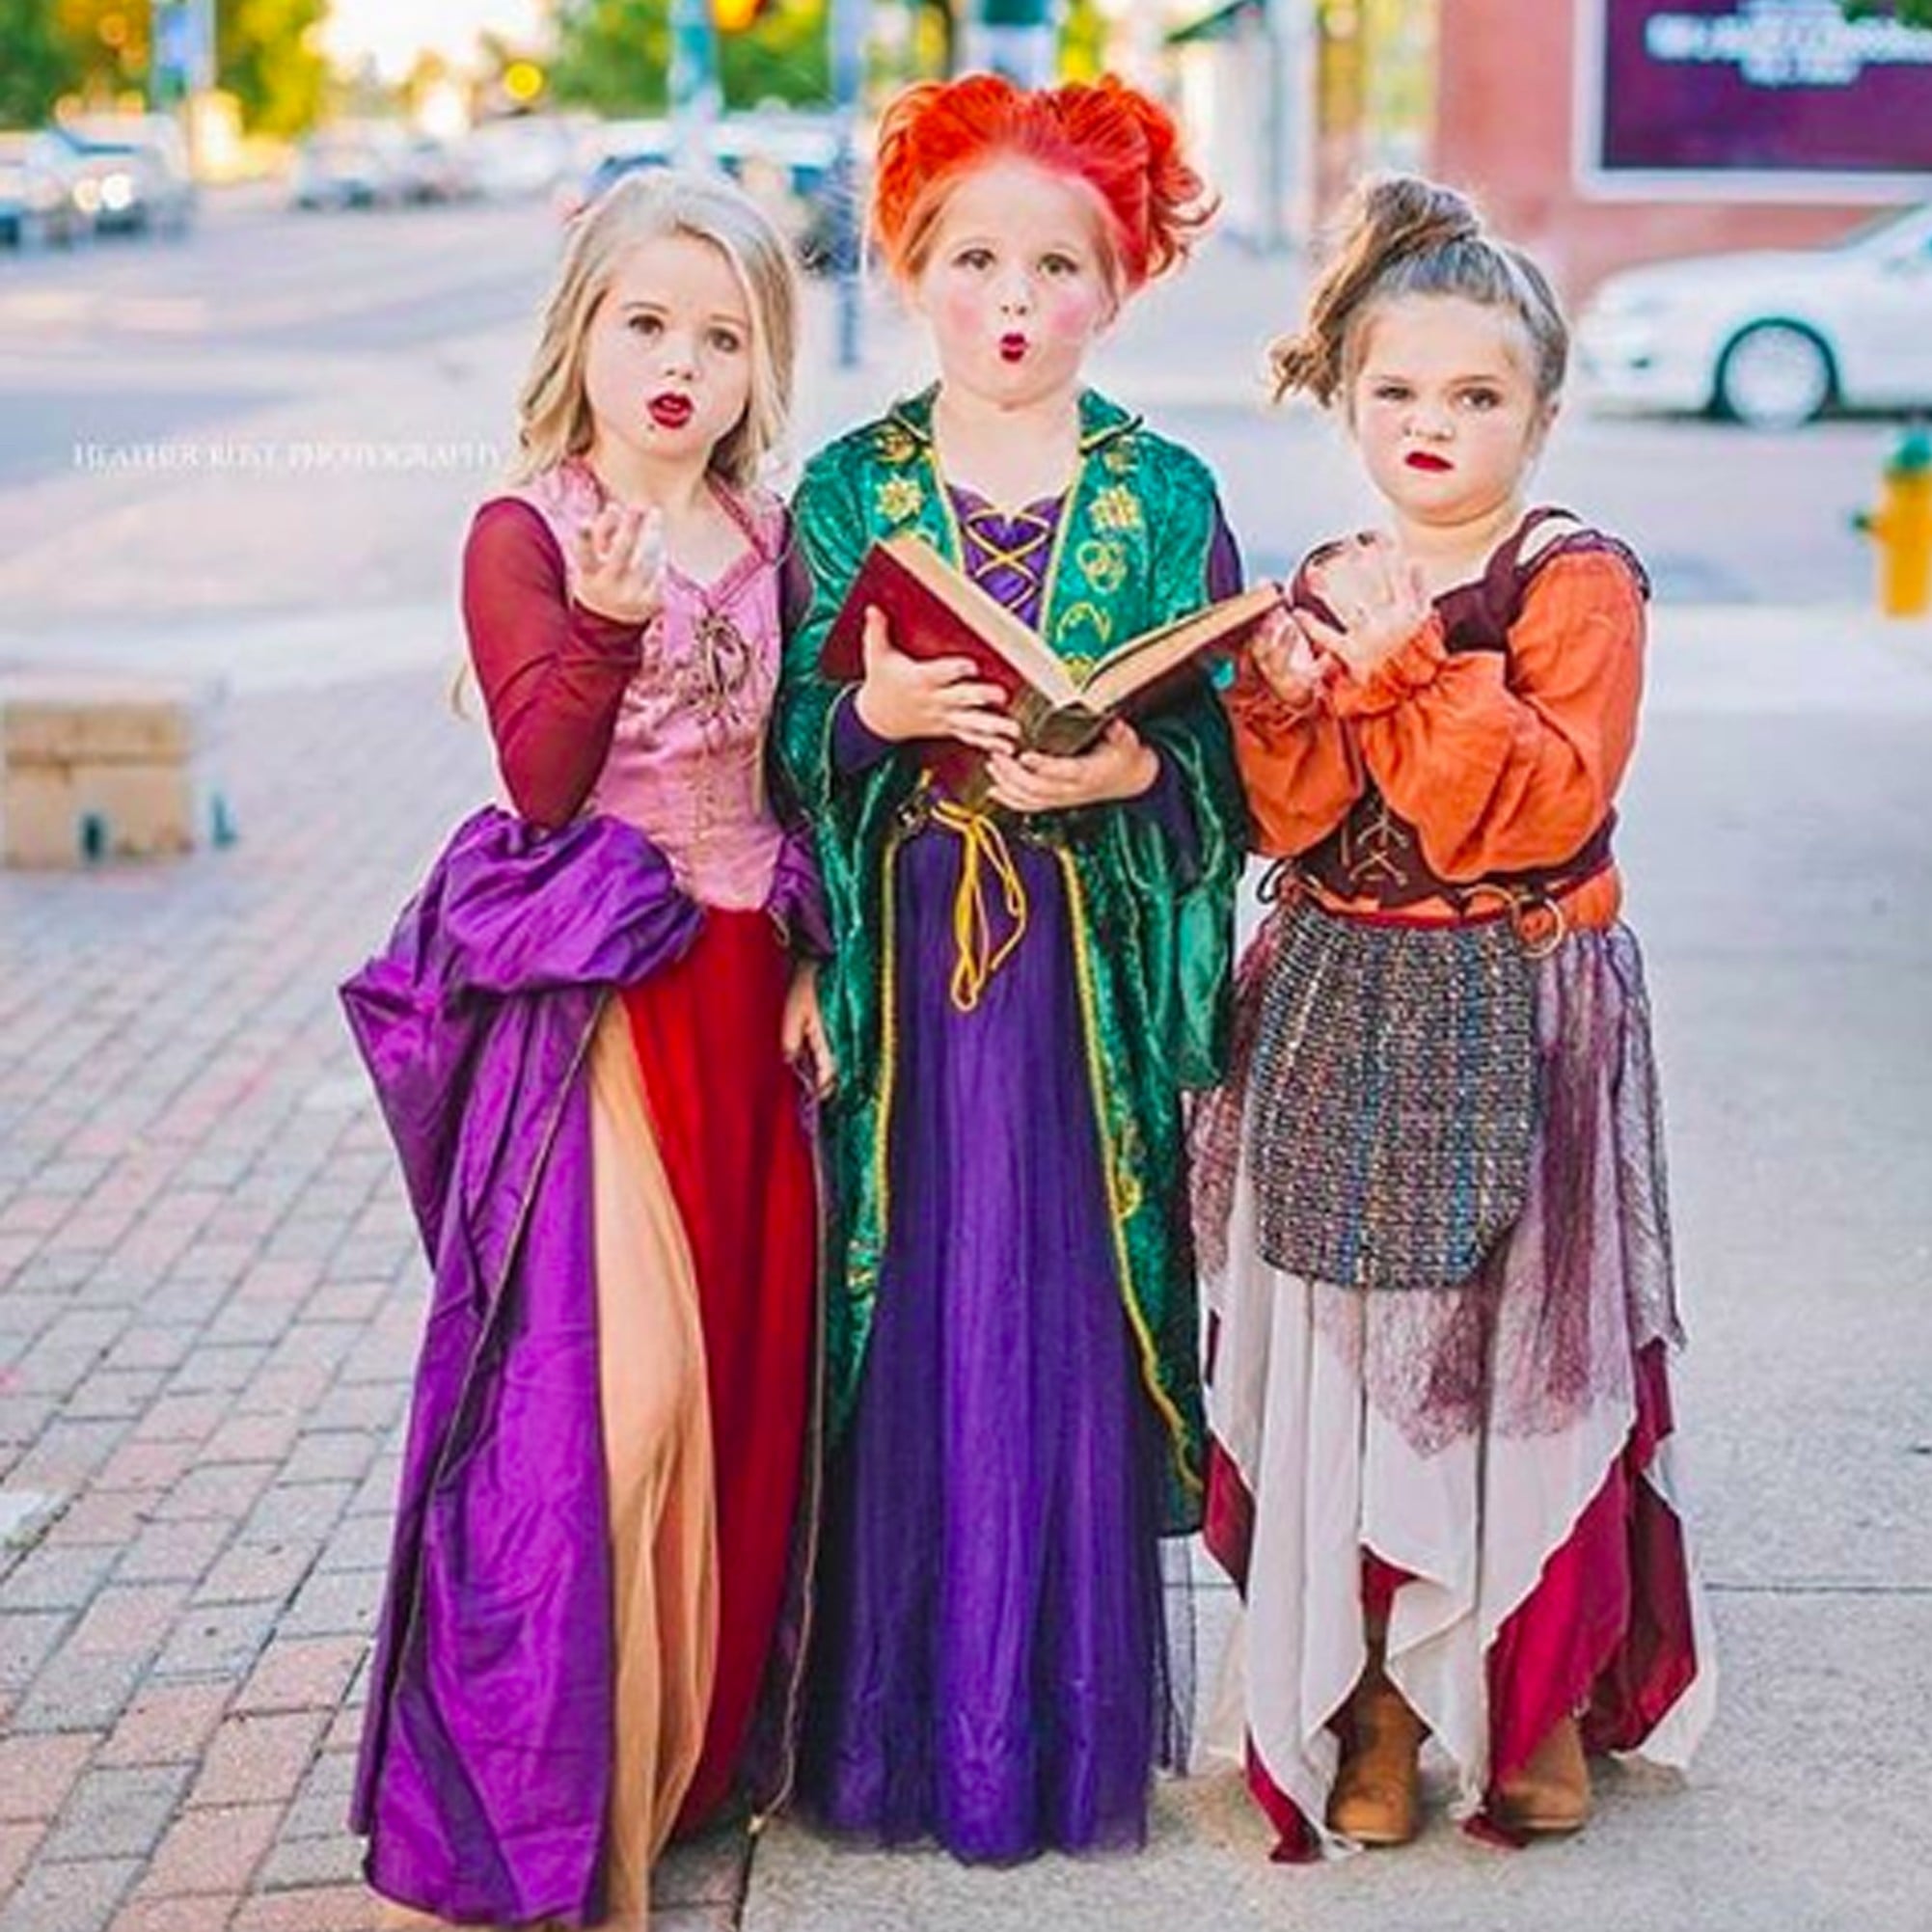 15 Best 'Hocus Pocus' Costume Ideas 2020 Sarah, Winifred And Mary ...